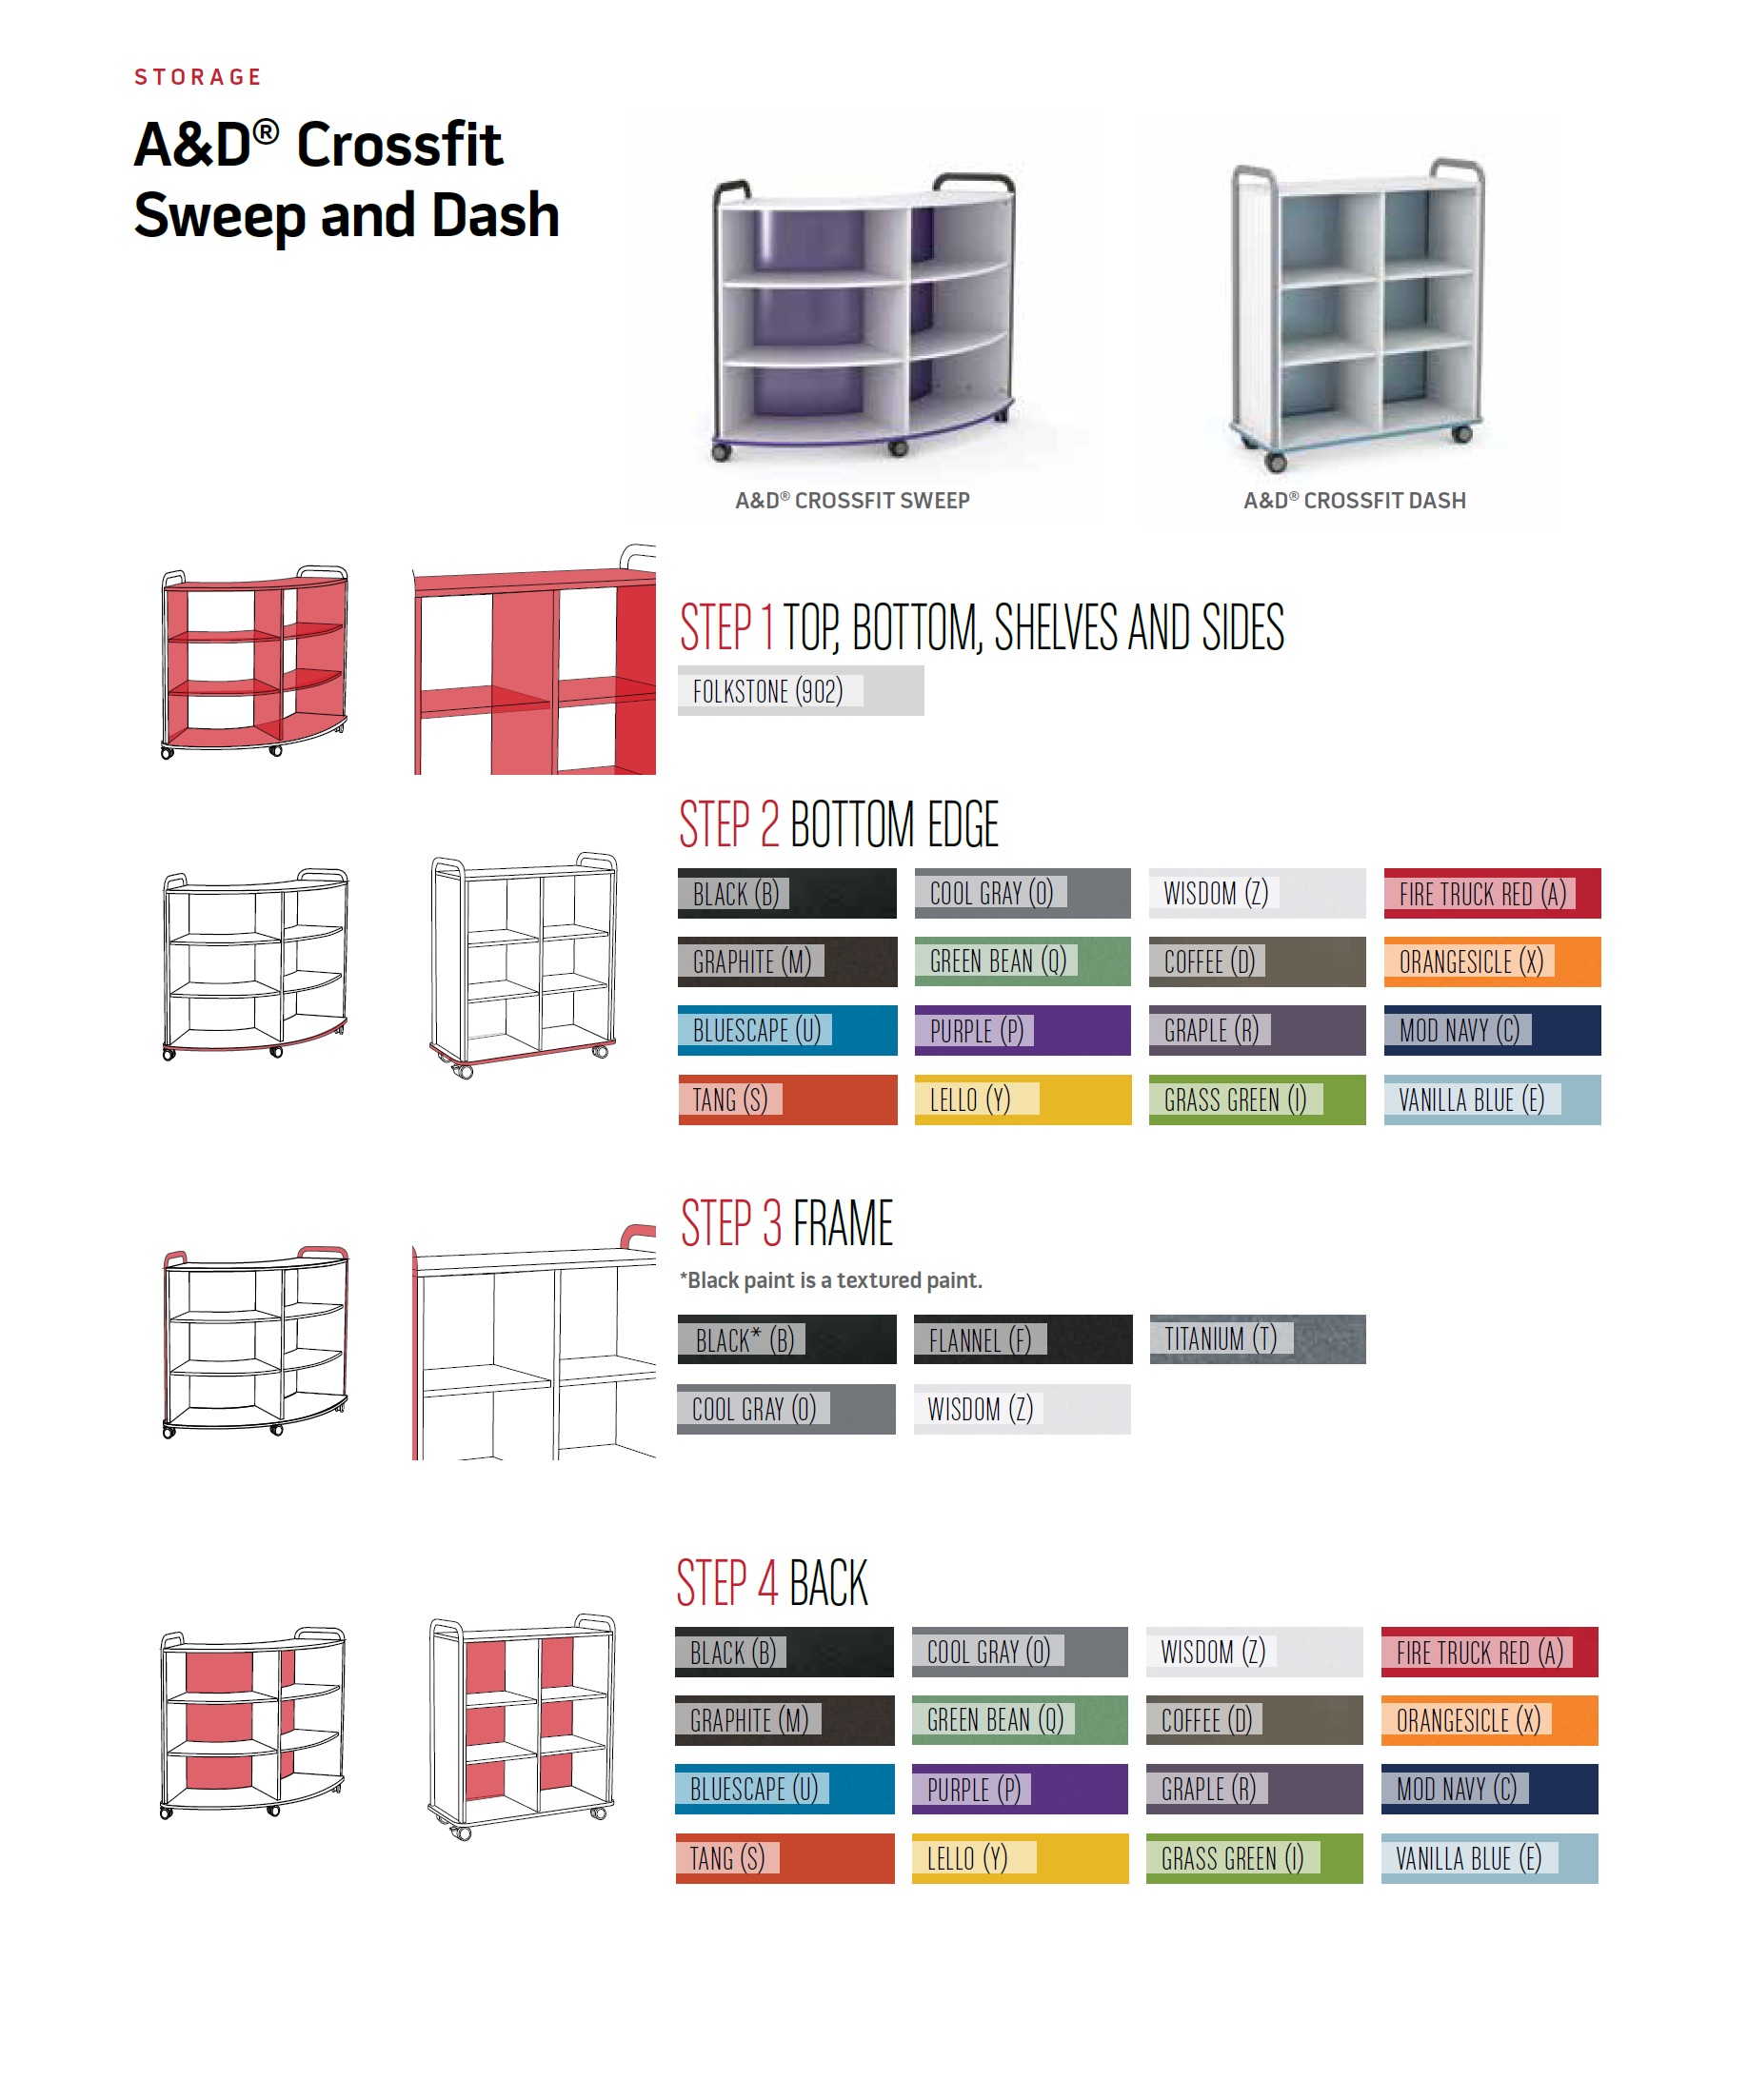 Crossfit-Sweep-and-Dash-Mobile-Shelves-Color-Choices-Paragon-Furniture